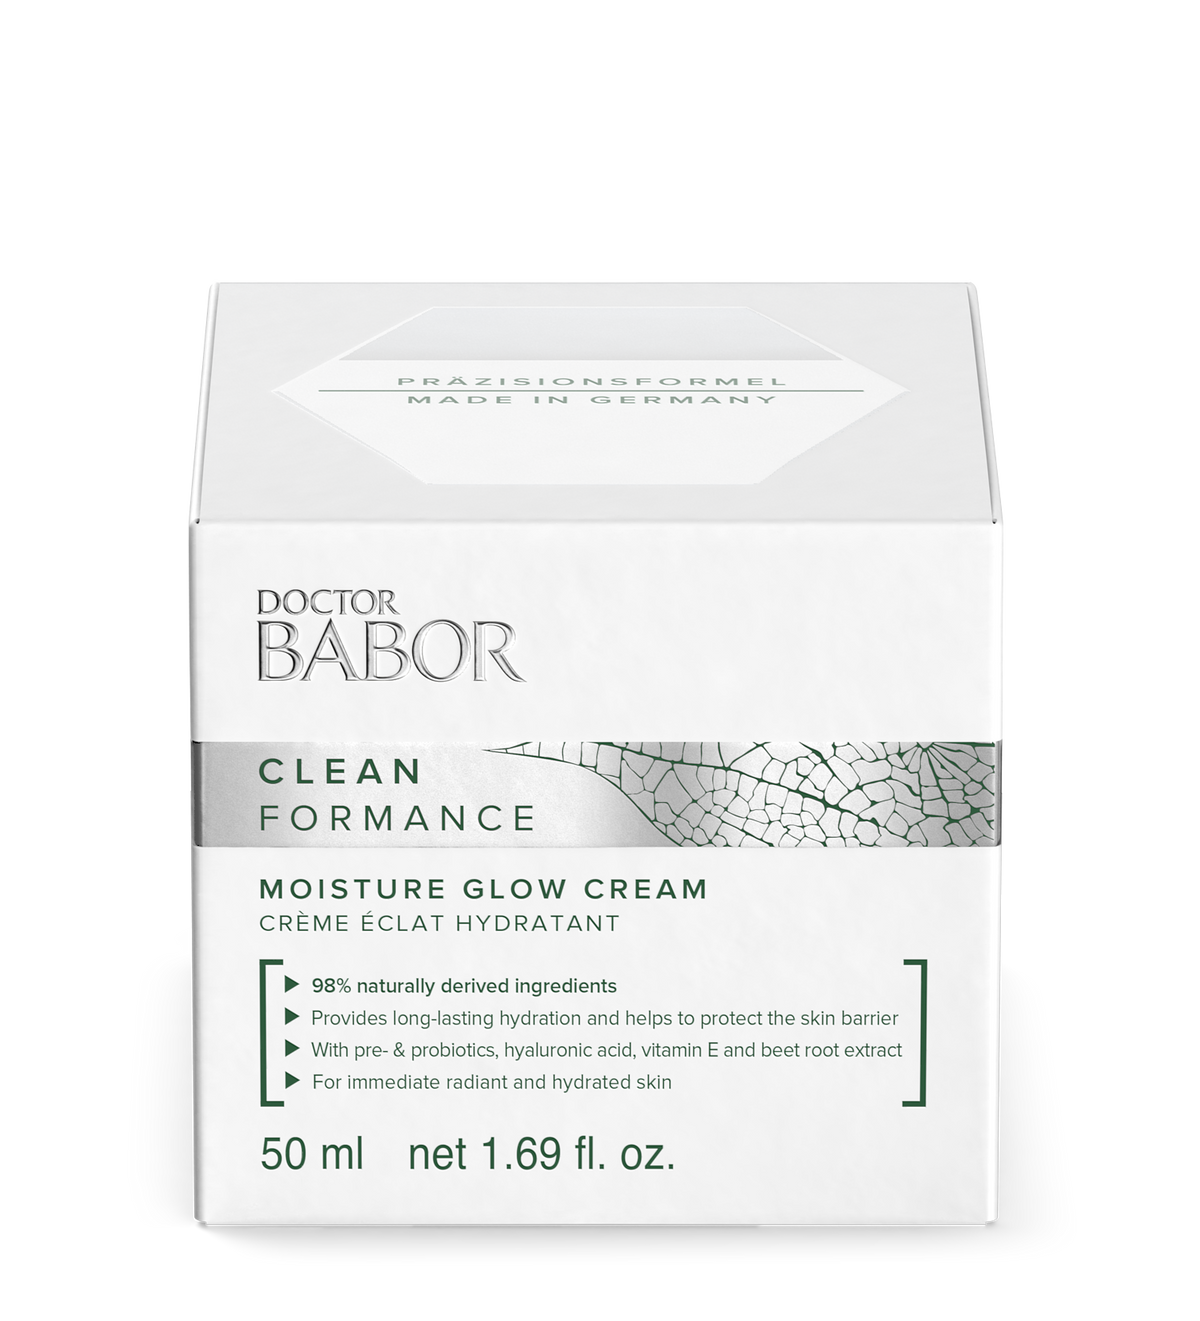 This rapidly absorbing and lightweight face cream balances skin’s microbiome to combat premature aging and delivers long-lasting moisture. Light-reflecting pigments even skin tone and create a glowing, healthy looking complexion.